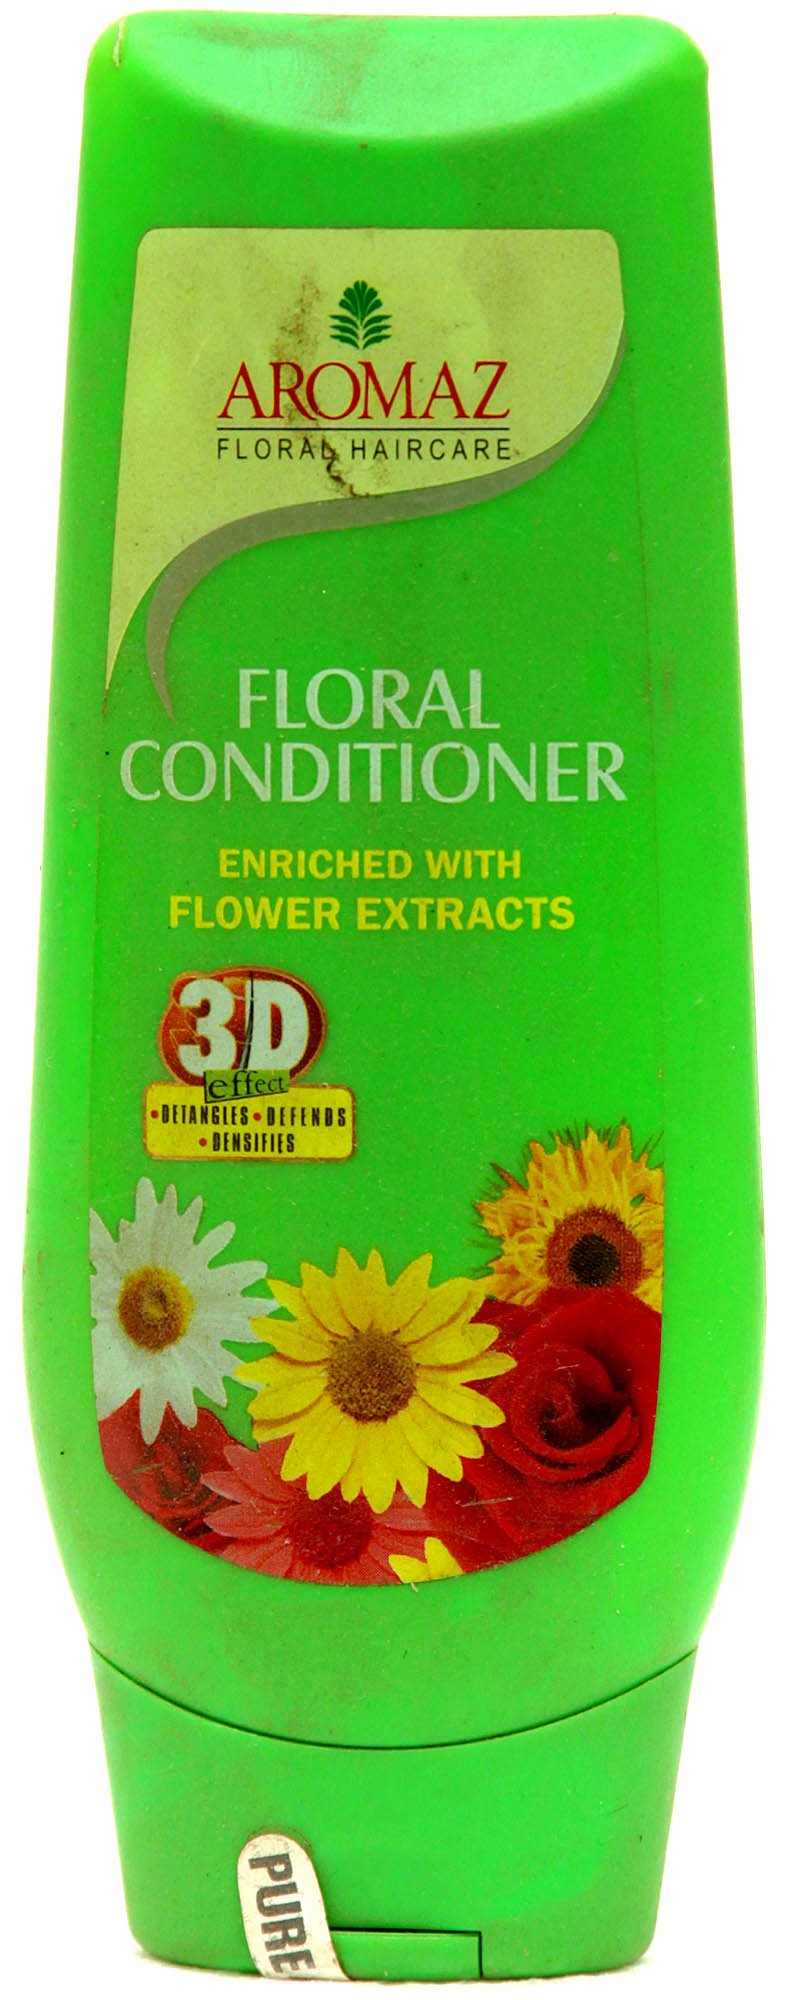 Floral Conditioner: Enriched With Flower Extracts - book cover